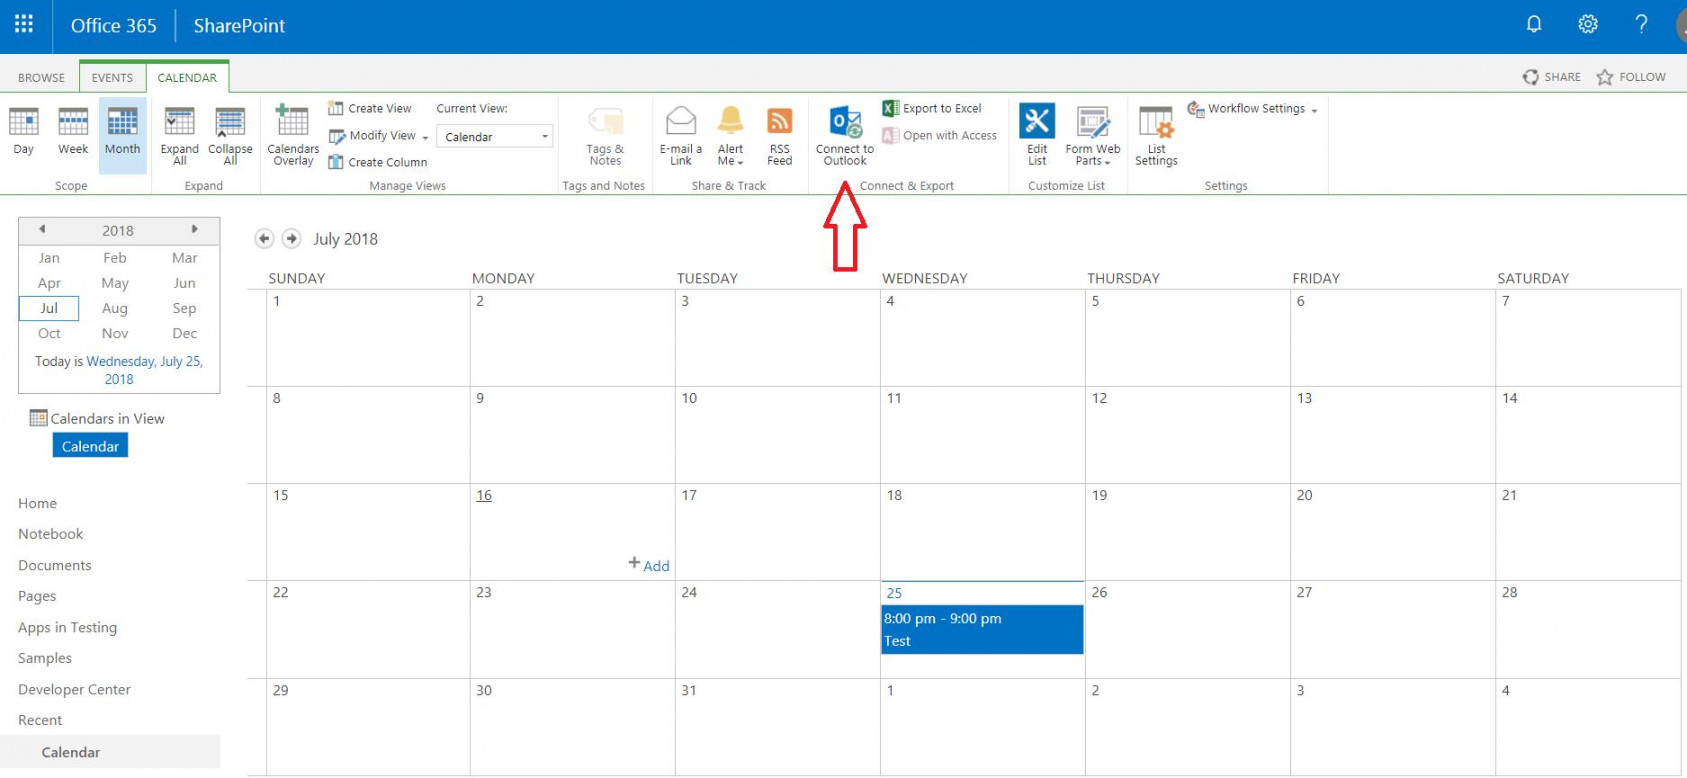 How To Sync A Sharepoint Calendar With Outlook?